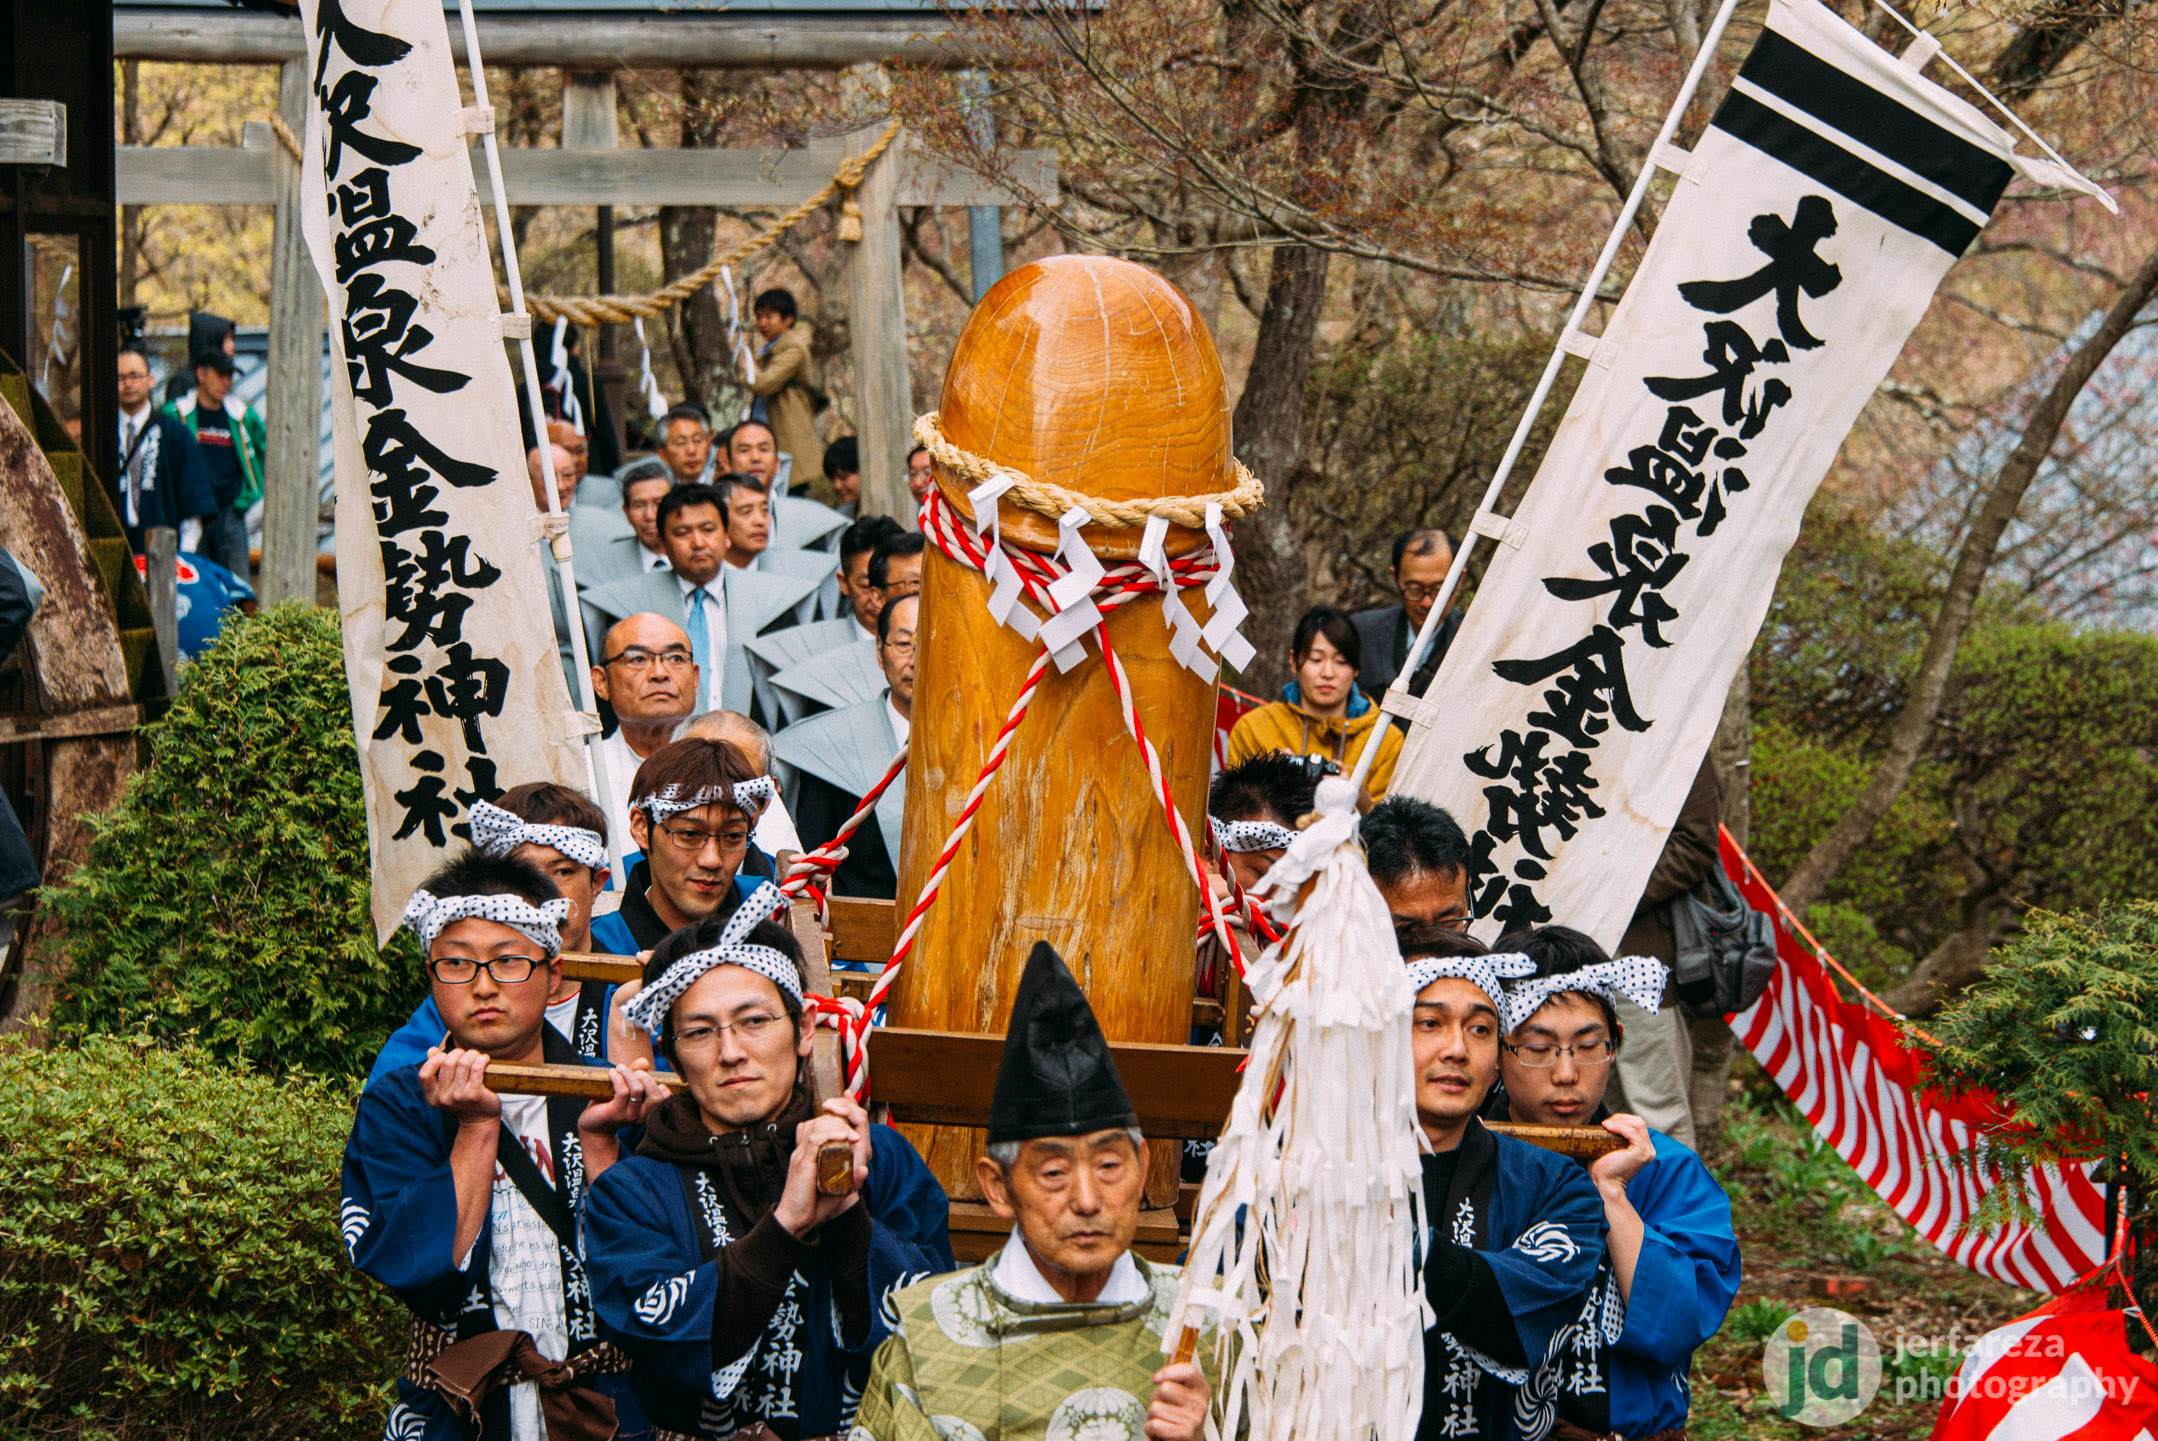 Konsei Festival: the Penis Festival from Iwate